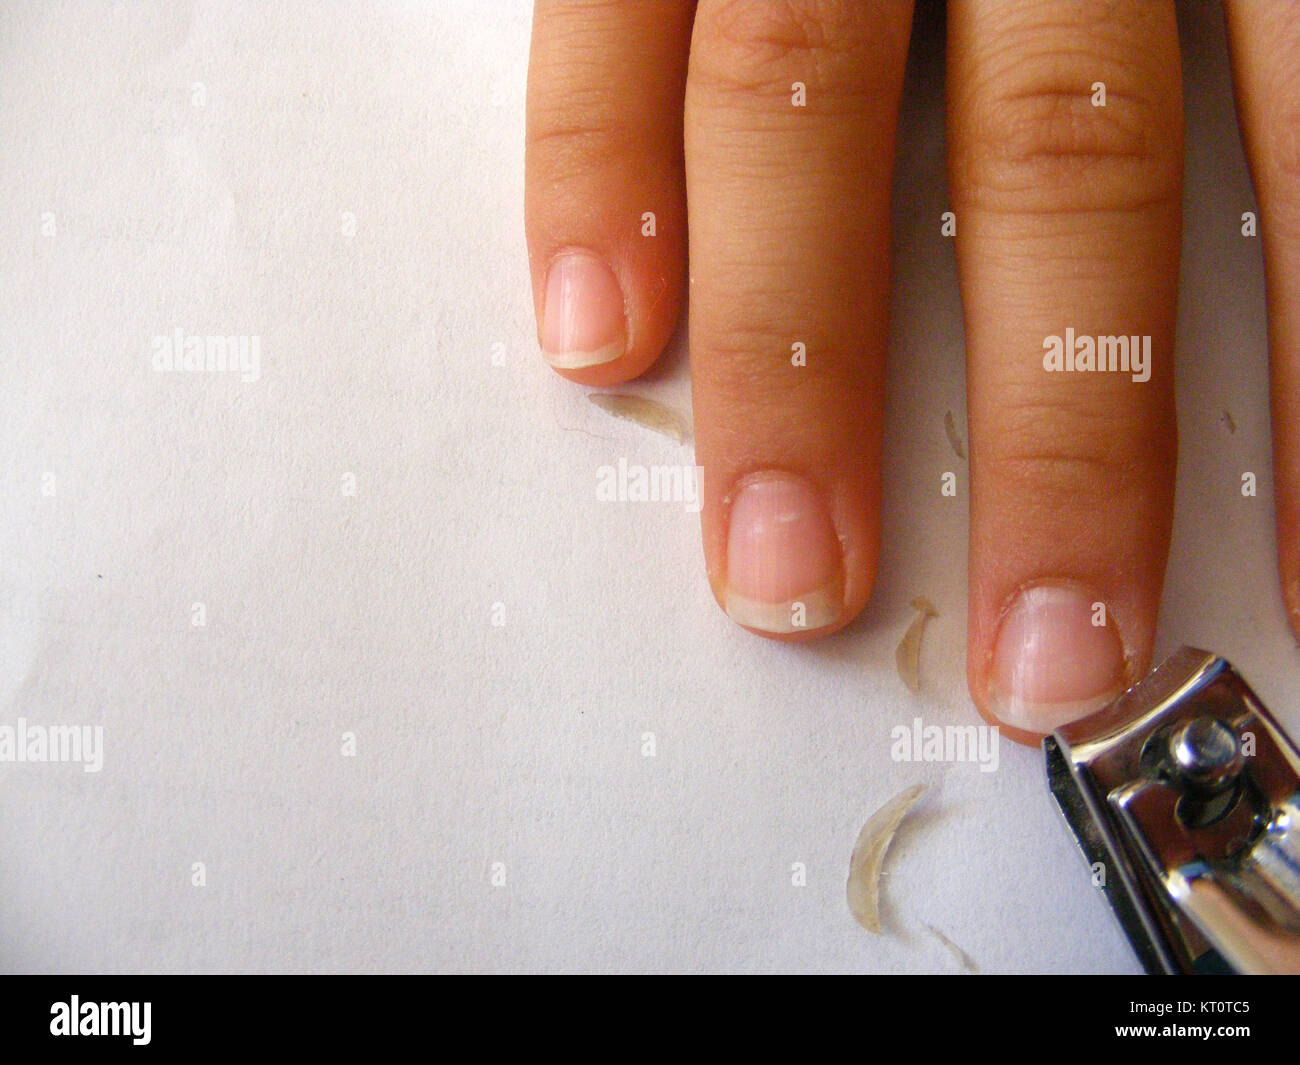 Nail cutting and cleaning Stock Photo